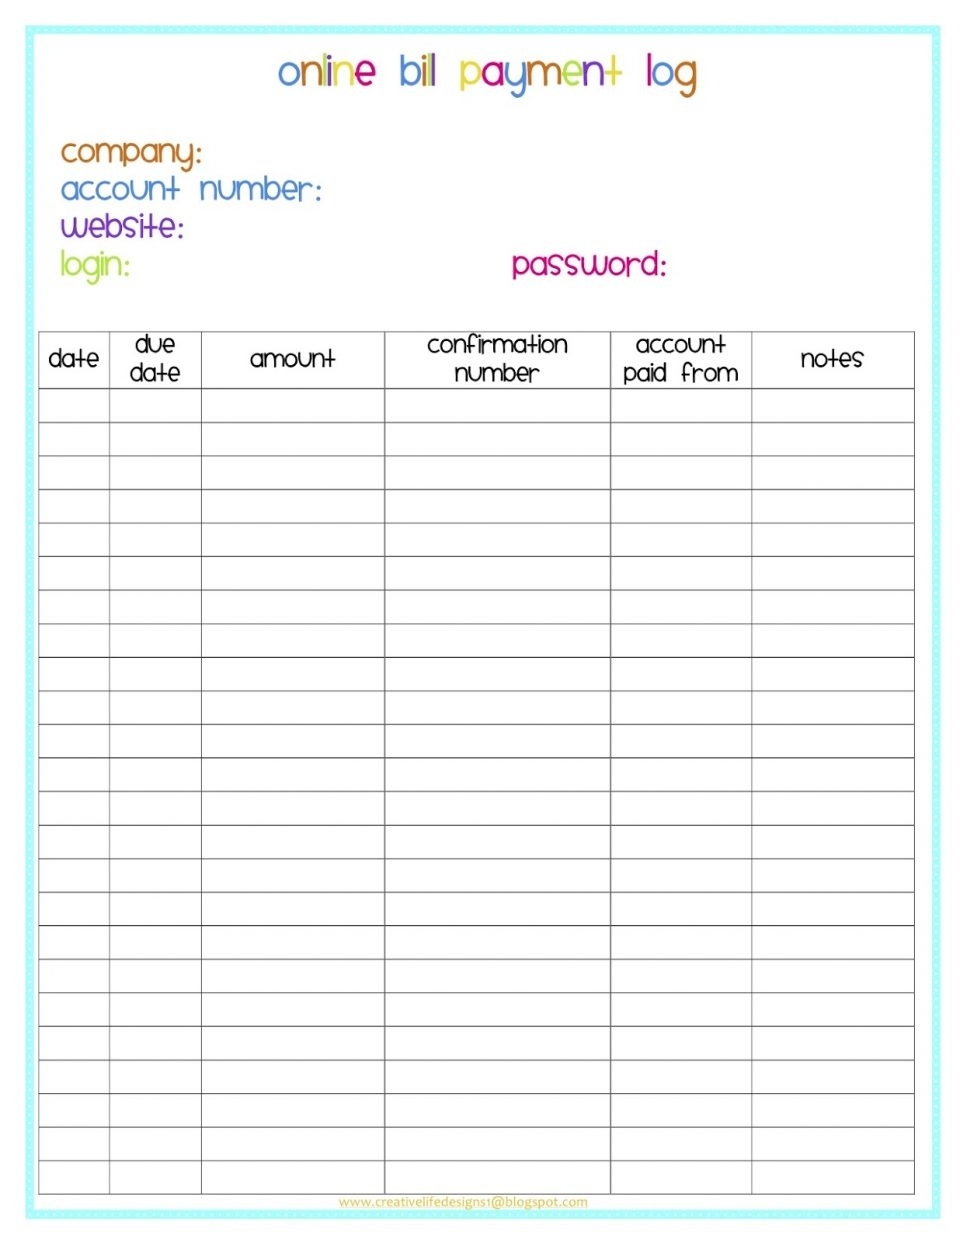 Free Printable Monthly Bill Template And Payment Sch intended for Monthly Bill Payment Blank Worksheet